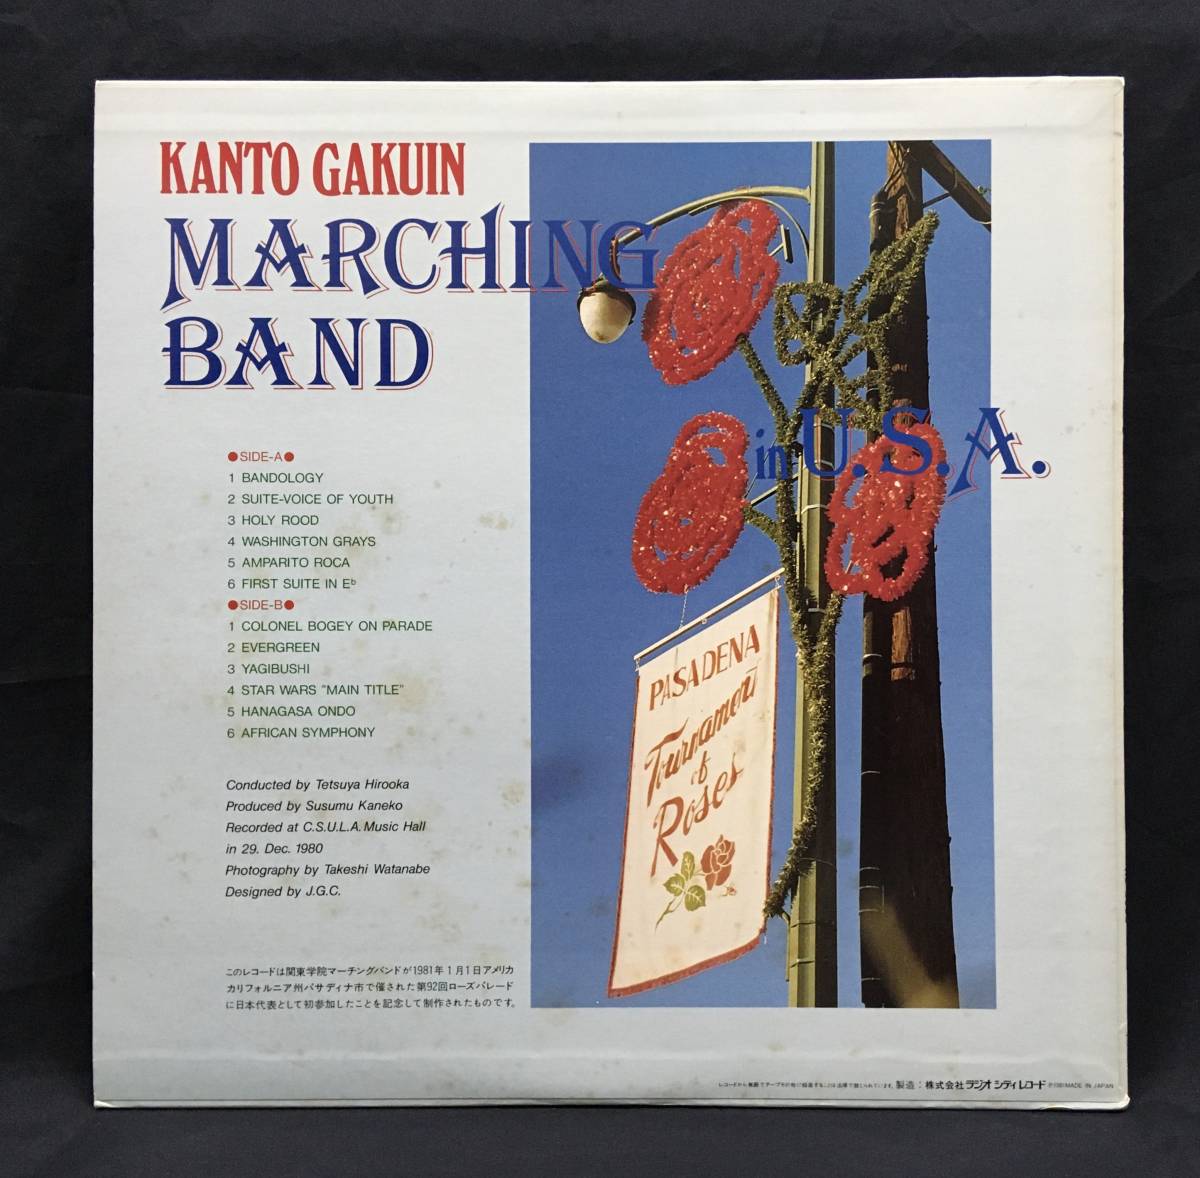 LP[Kanto Gakuin Marching Band in U.S.A.] Kanto .. marching band 